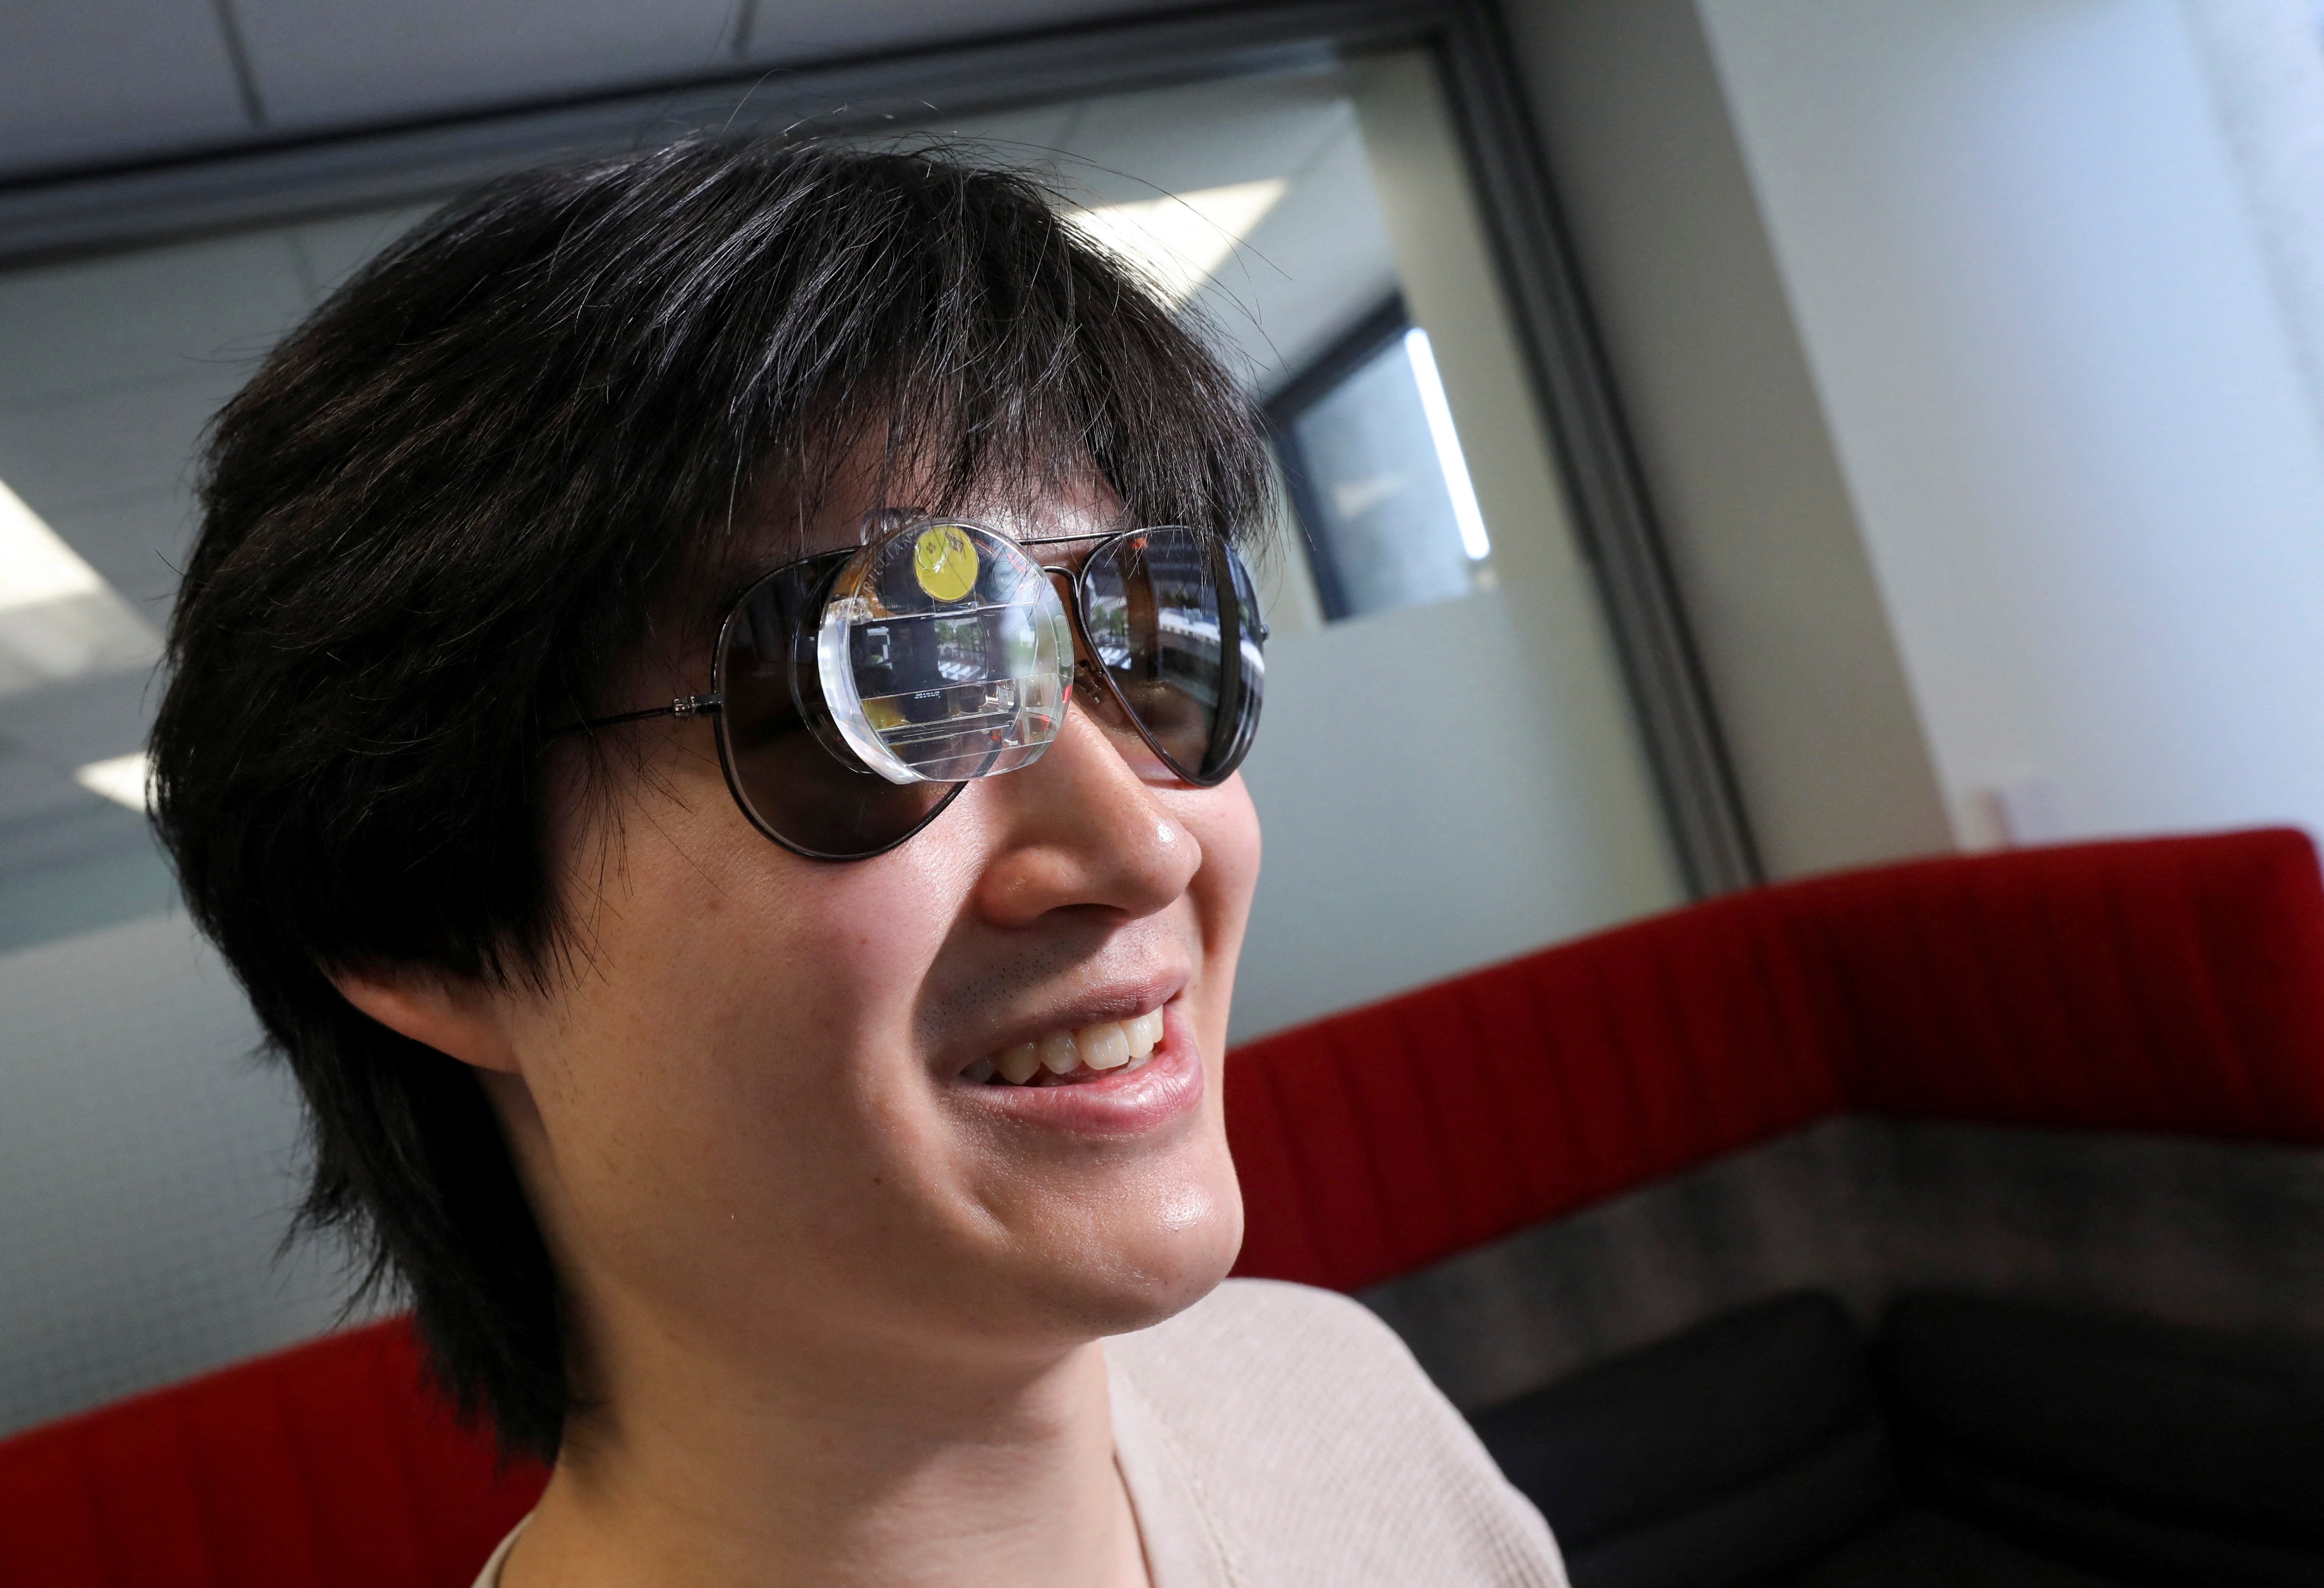 Bryan Chiang wears an augmented reality eyepiece equipped with RizzGPT in San Francisco, California